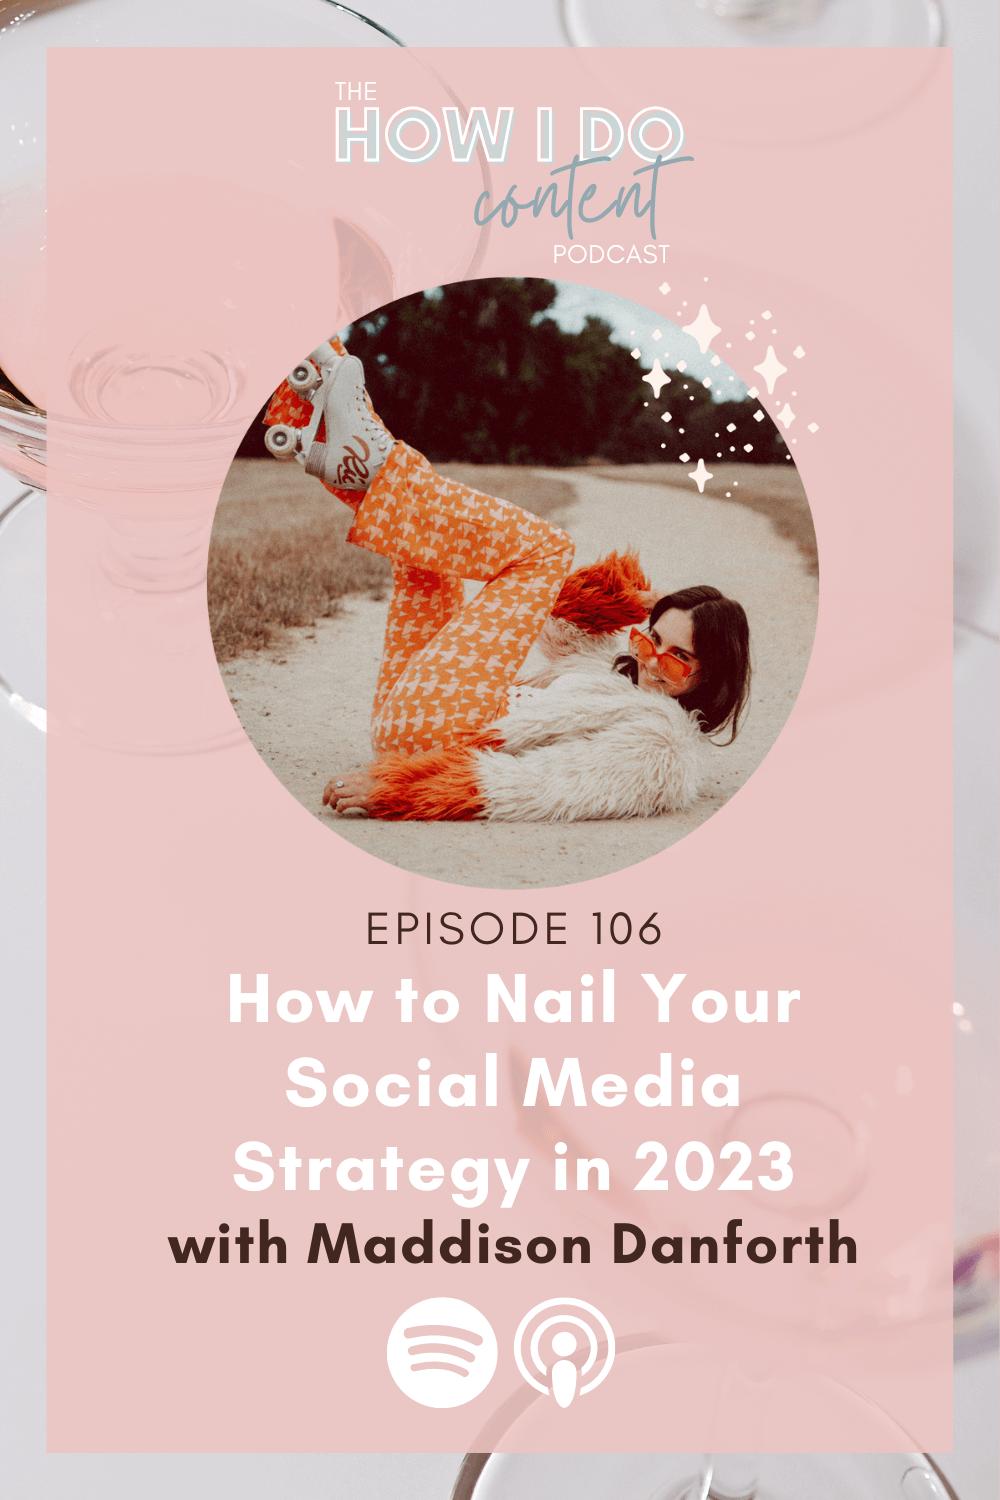 How to Nail Your Social Media Strategy in 2023 with Maddison Danforth